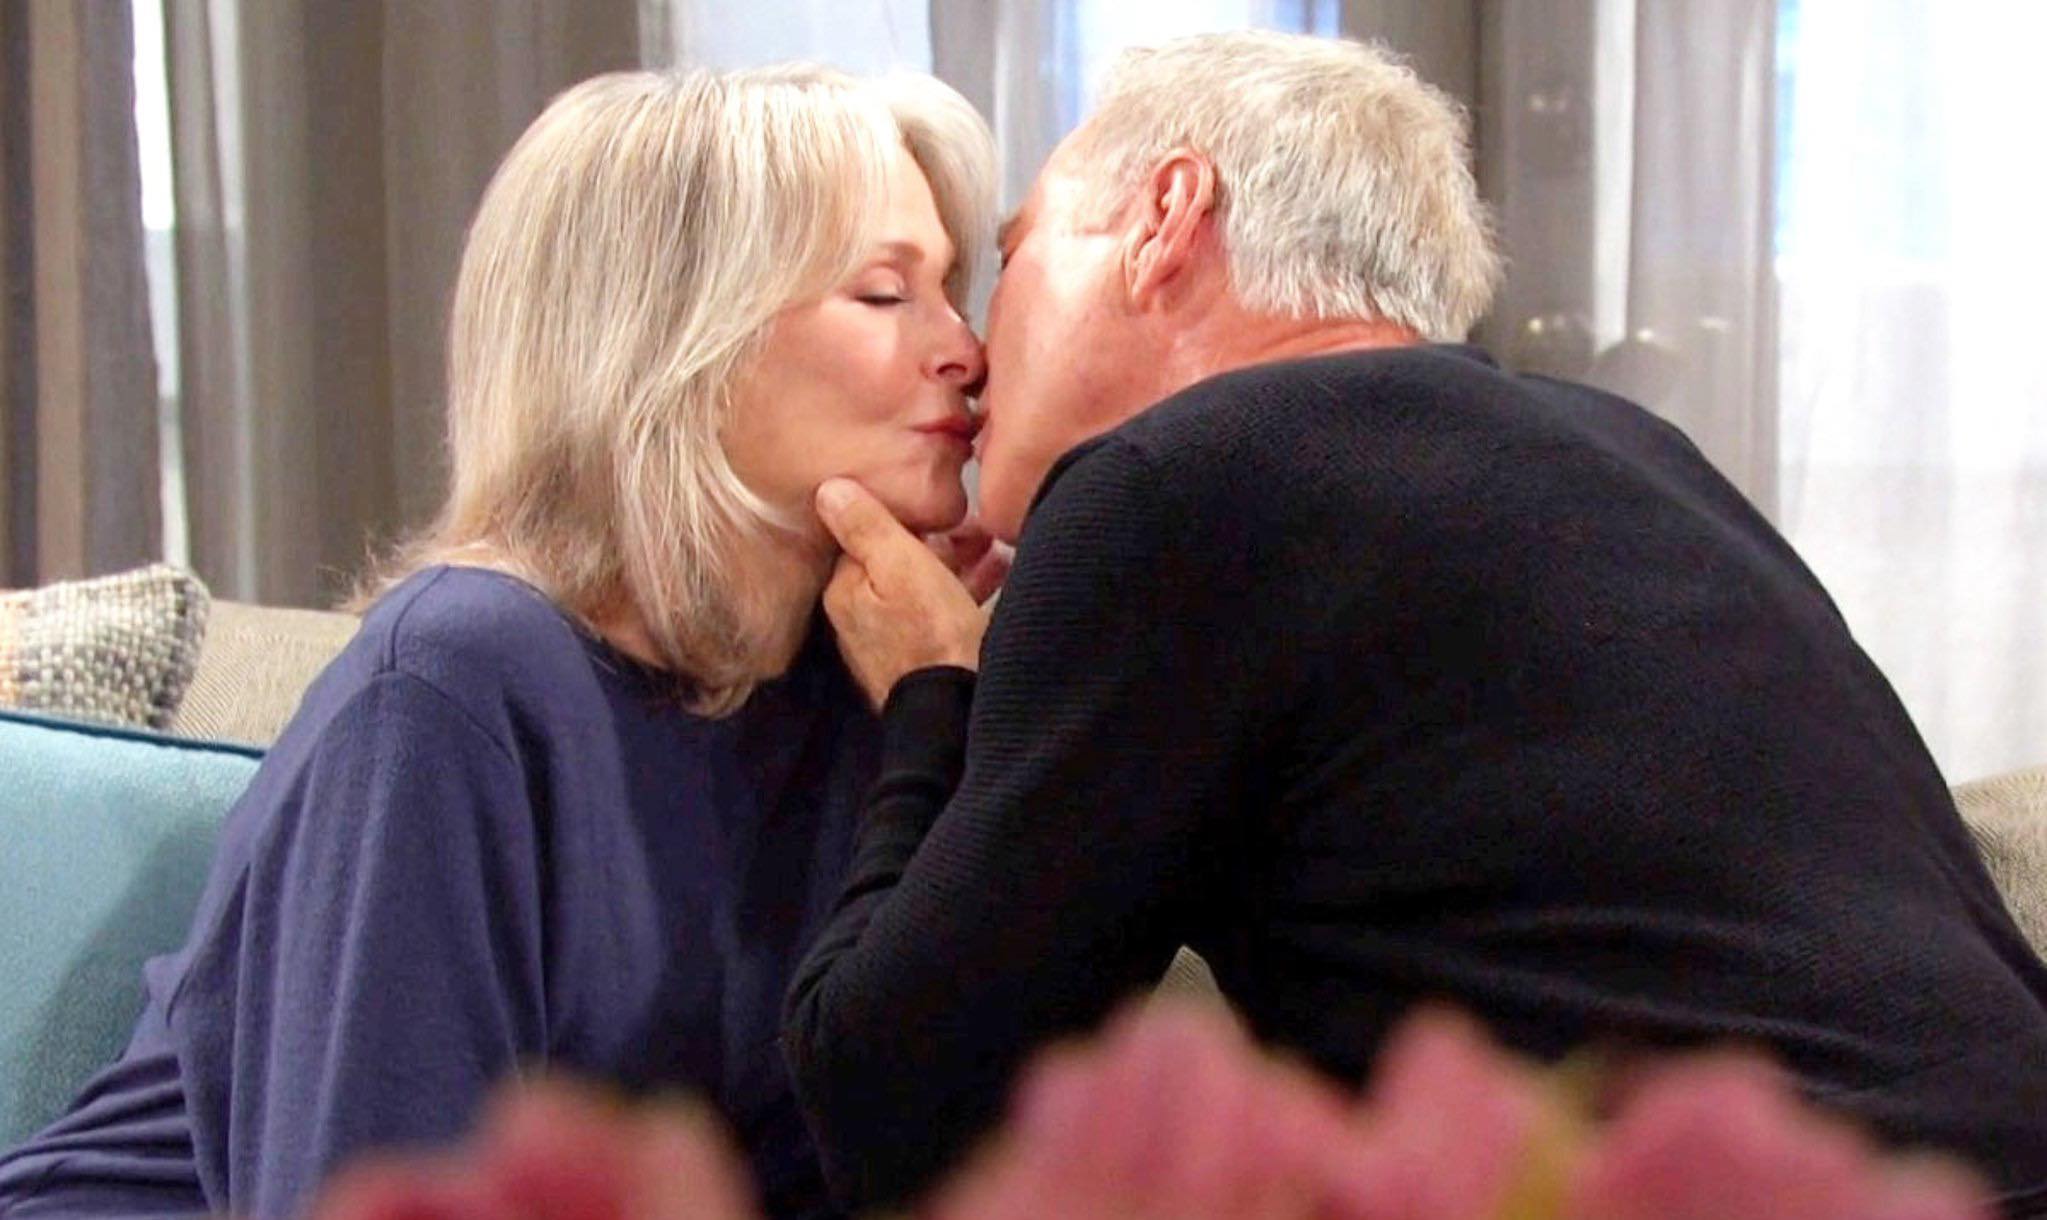 Couple of the Week: Days of Our Lives' John and Marlena | Soap Opera News